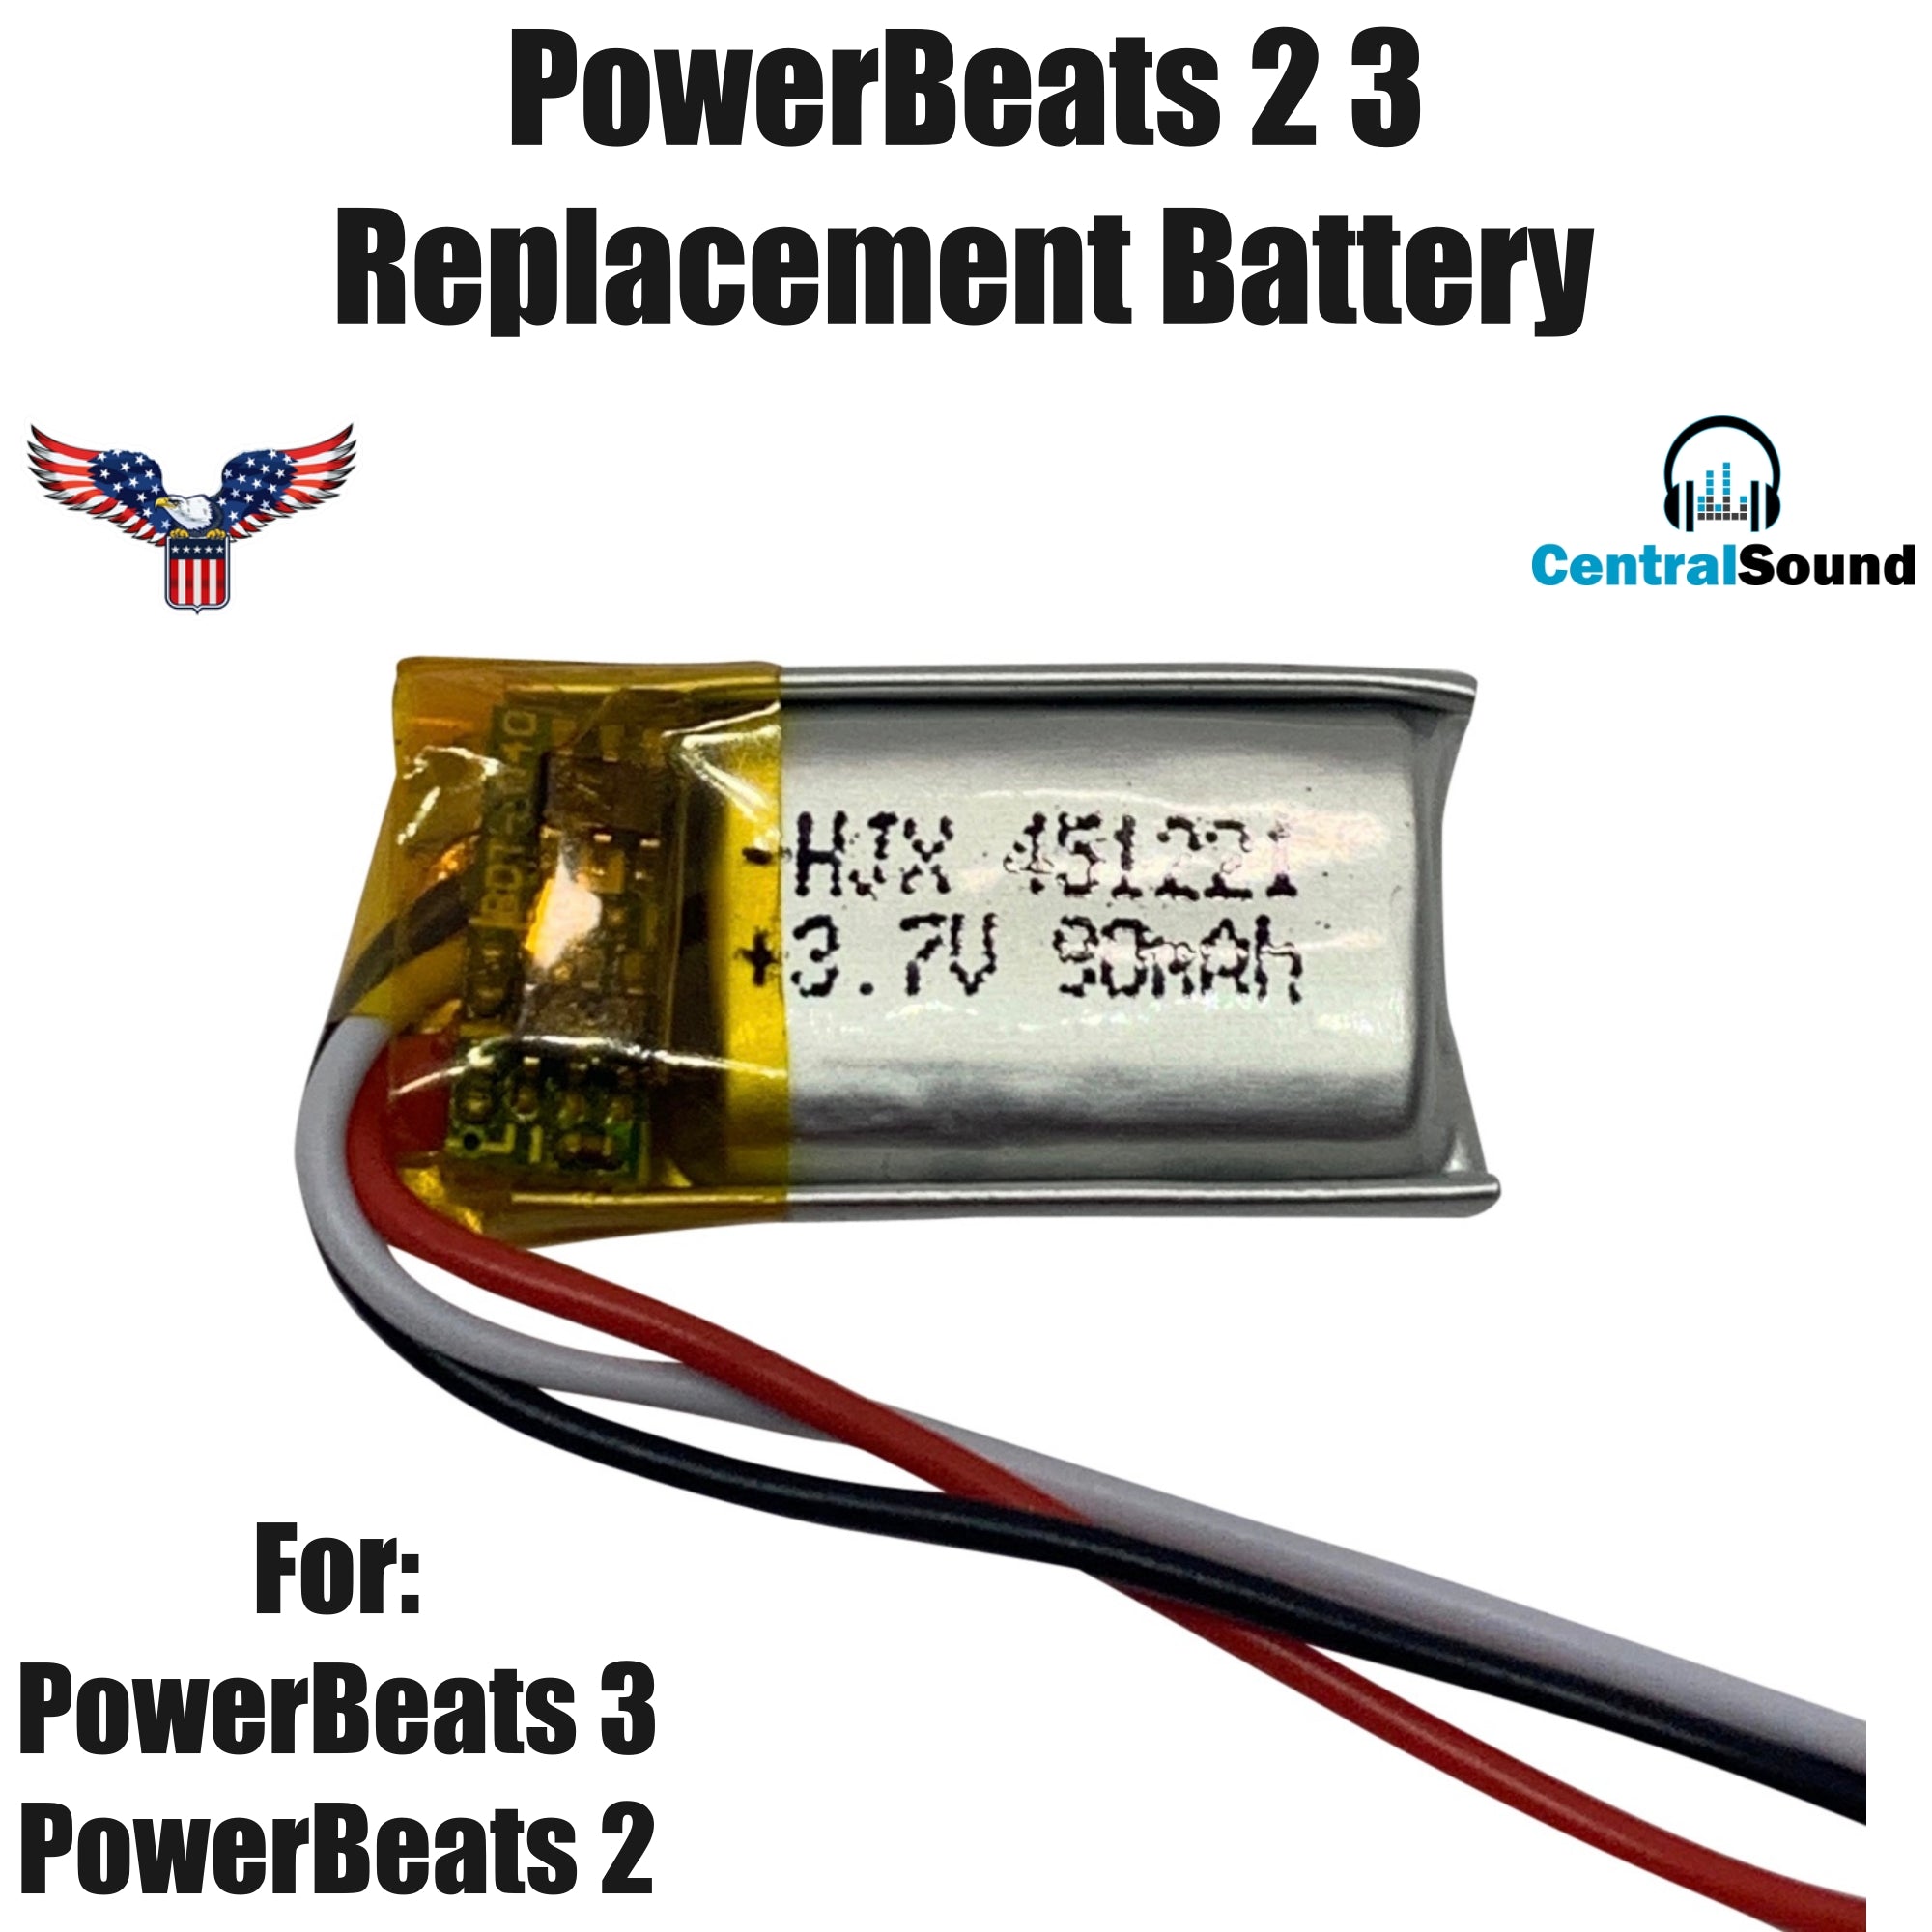 Powerbeats 2 3 Battery Replacement Wireless In-Ear Headphones Parts - CentralSound